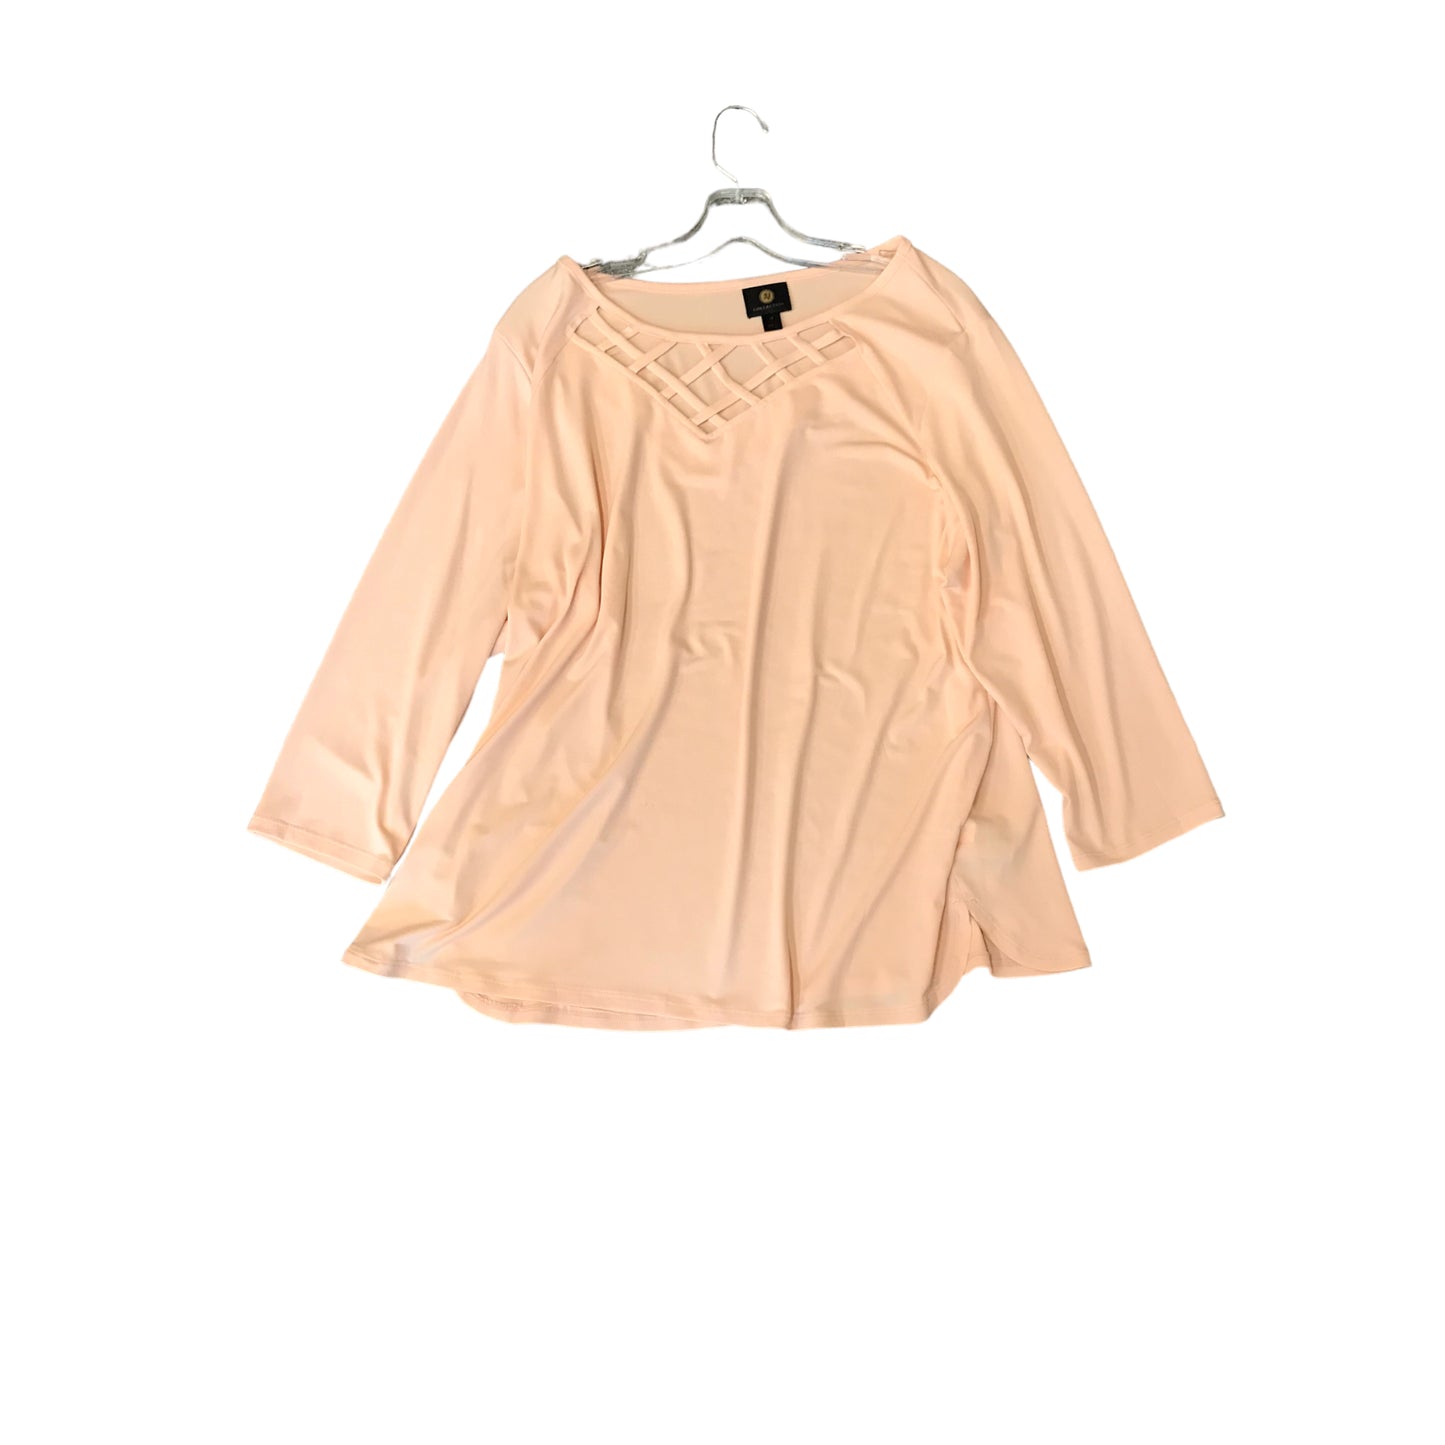 Top Long Sleeve Basic By Jm Collections  Size: 1x